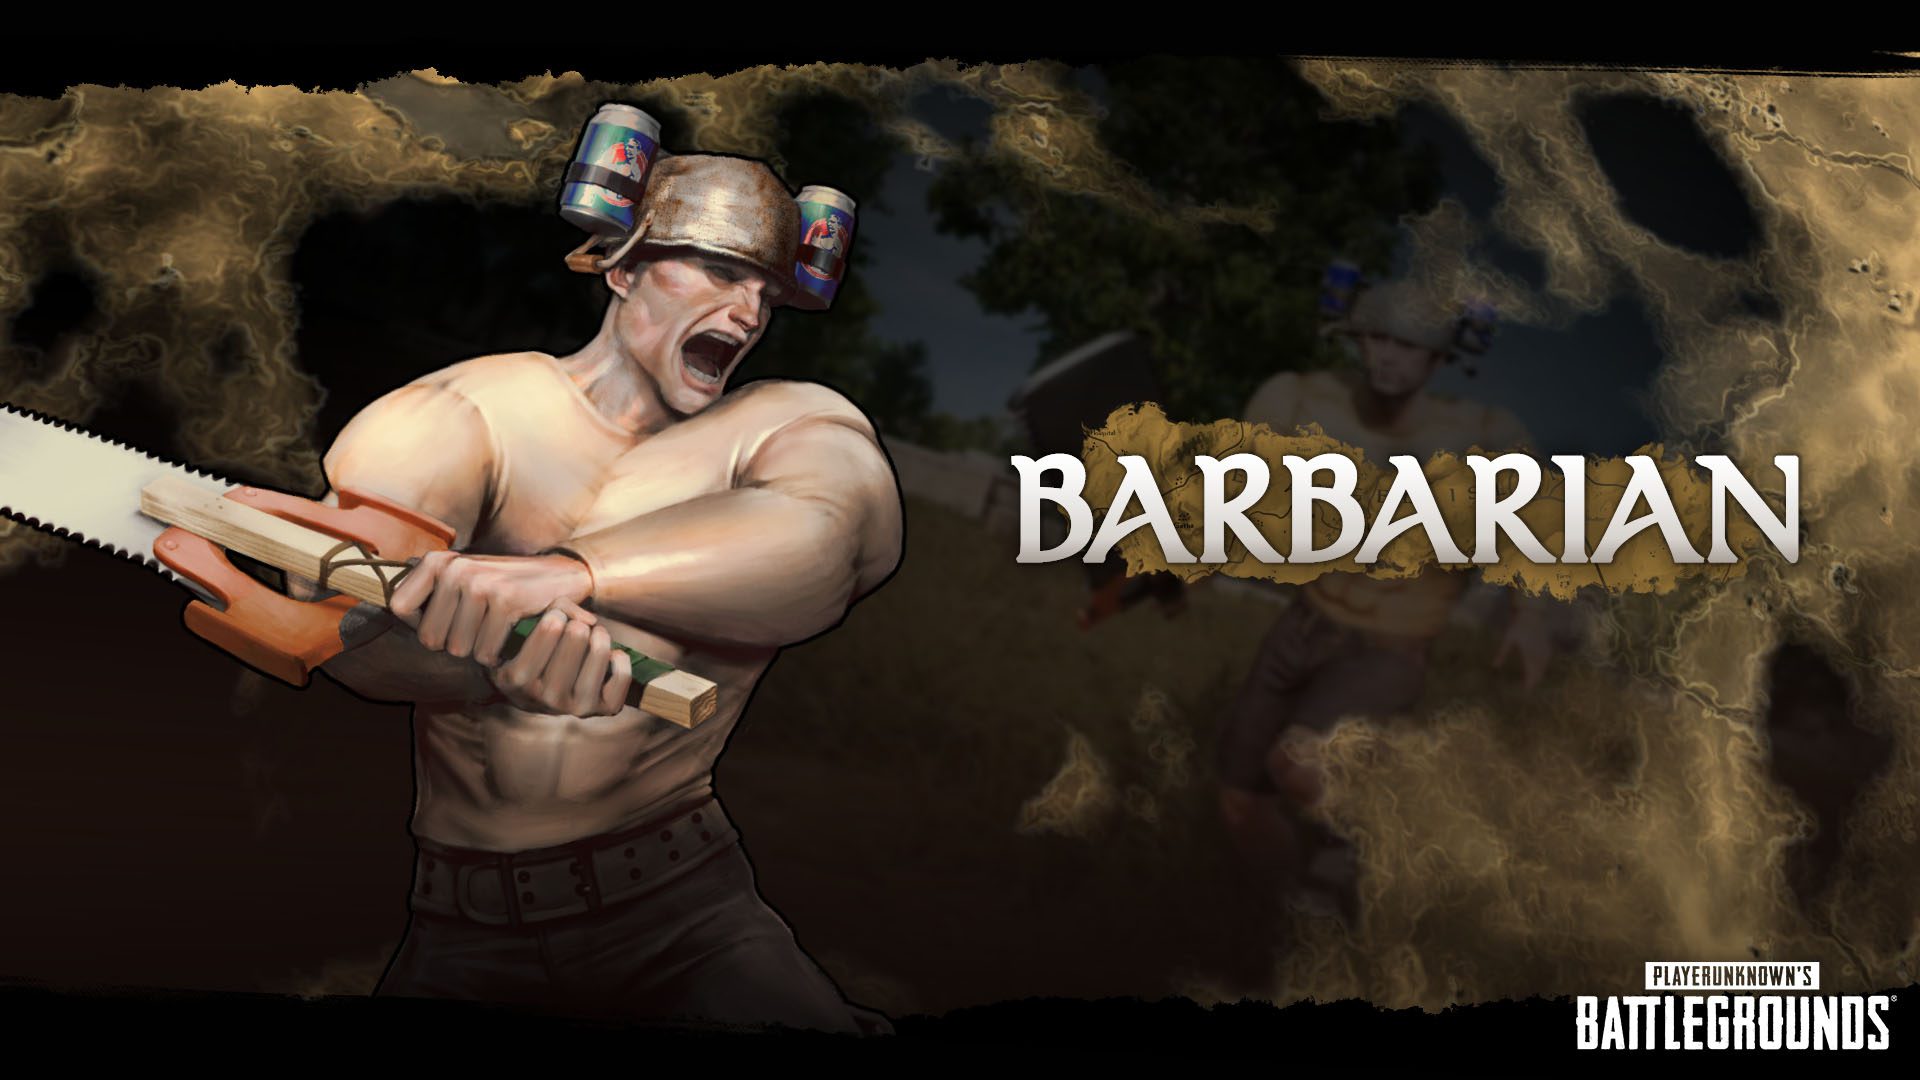 Barbarian from Fantasy War Royale in the battlefields of Playunknown